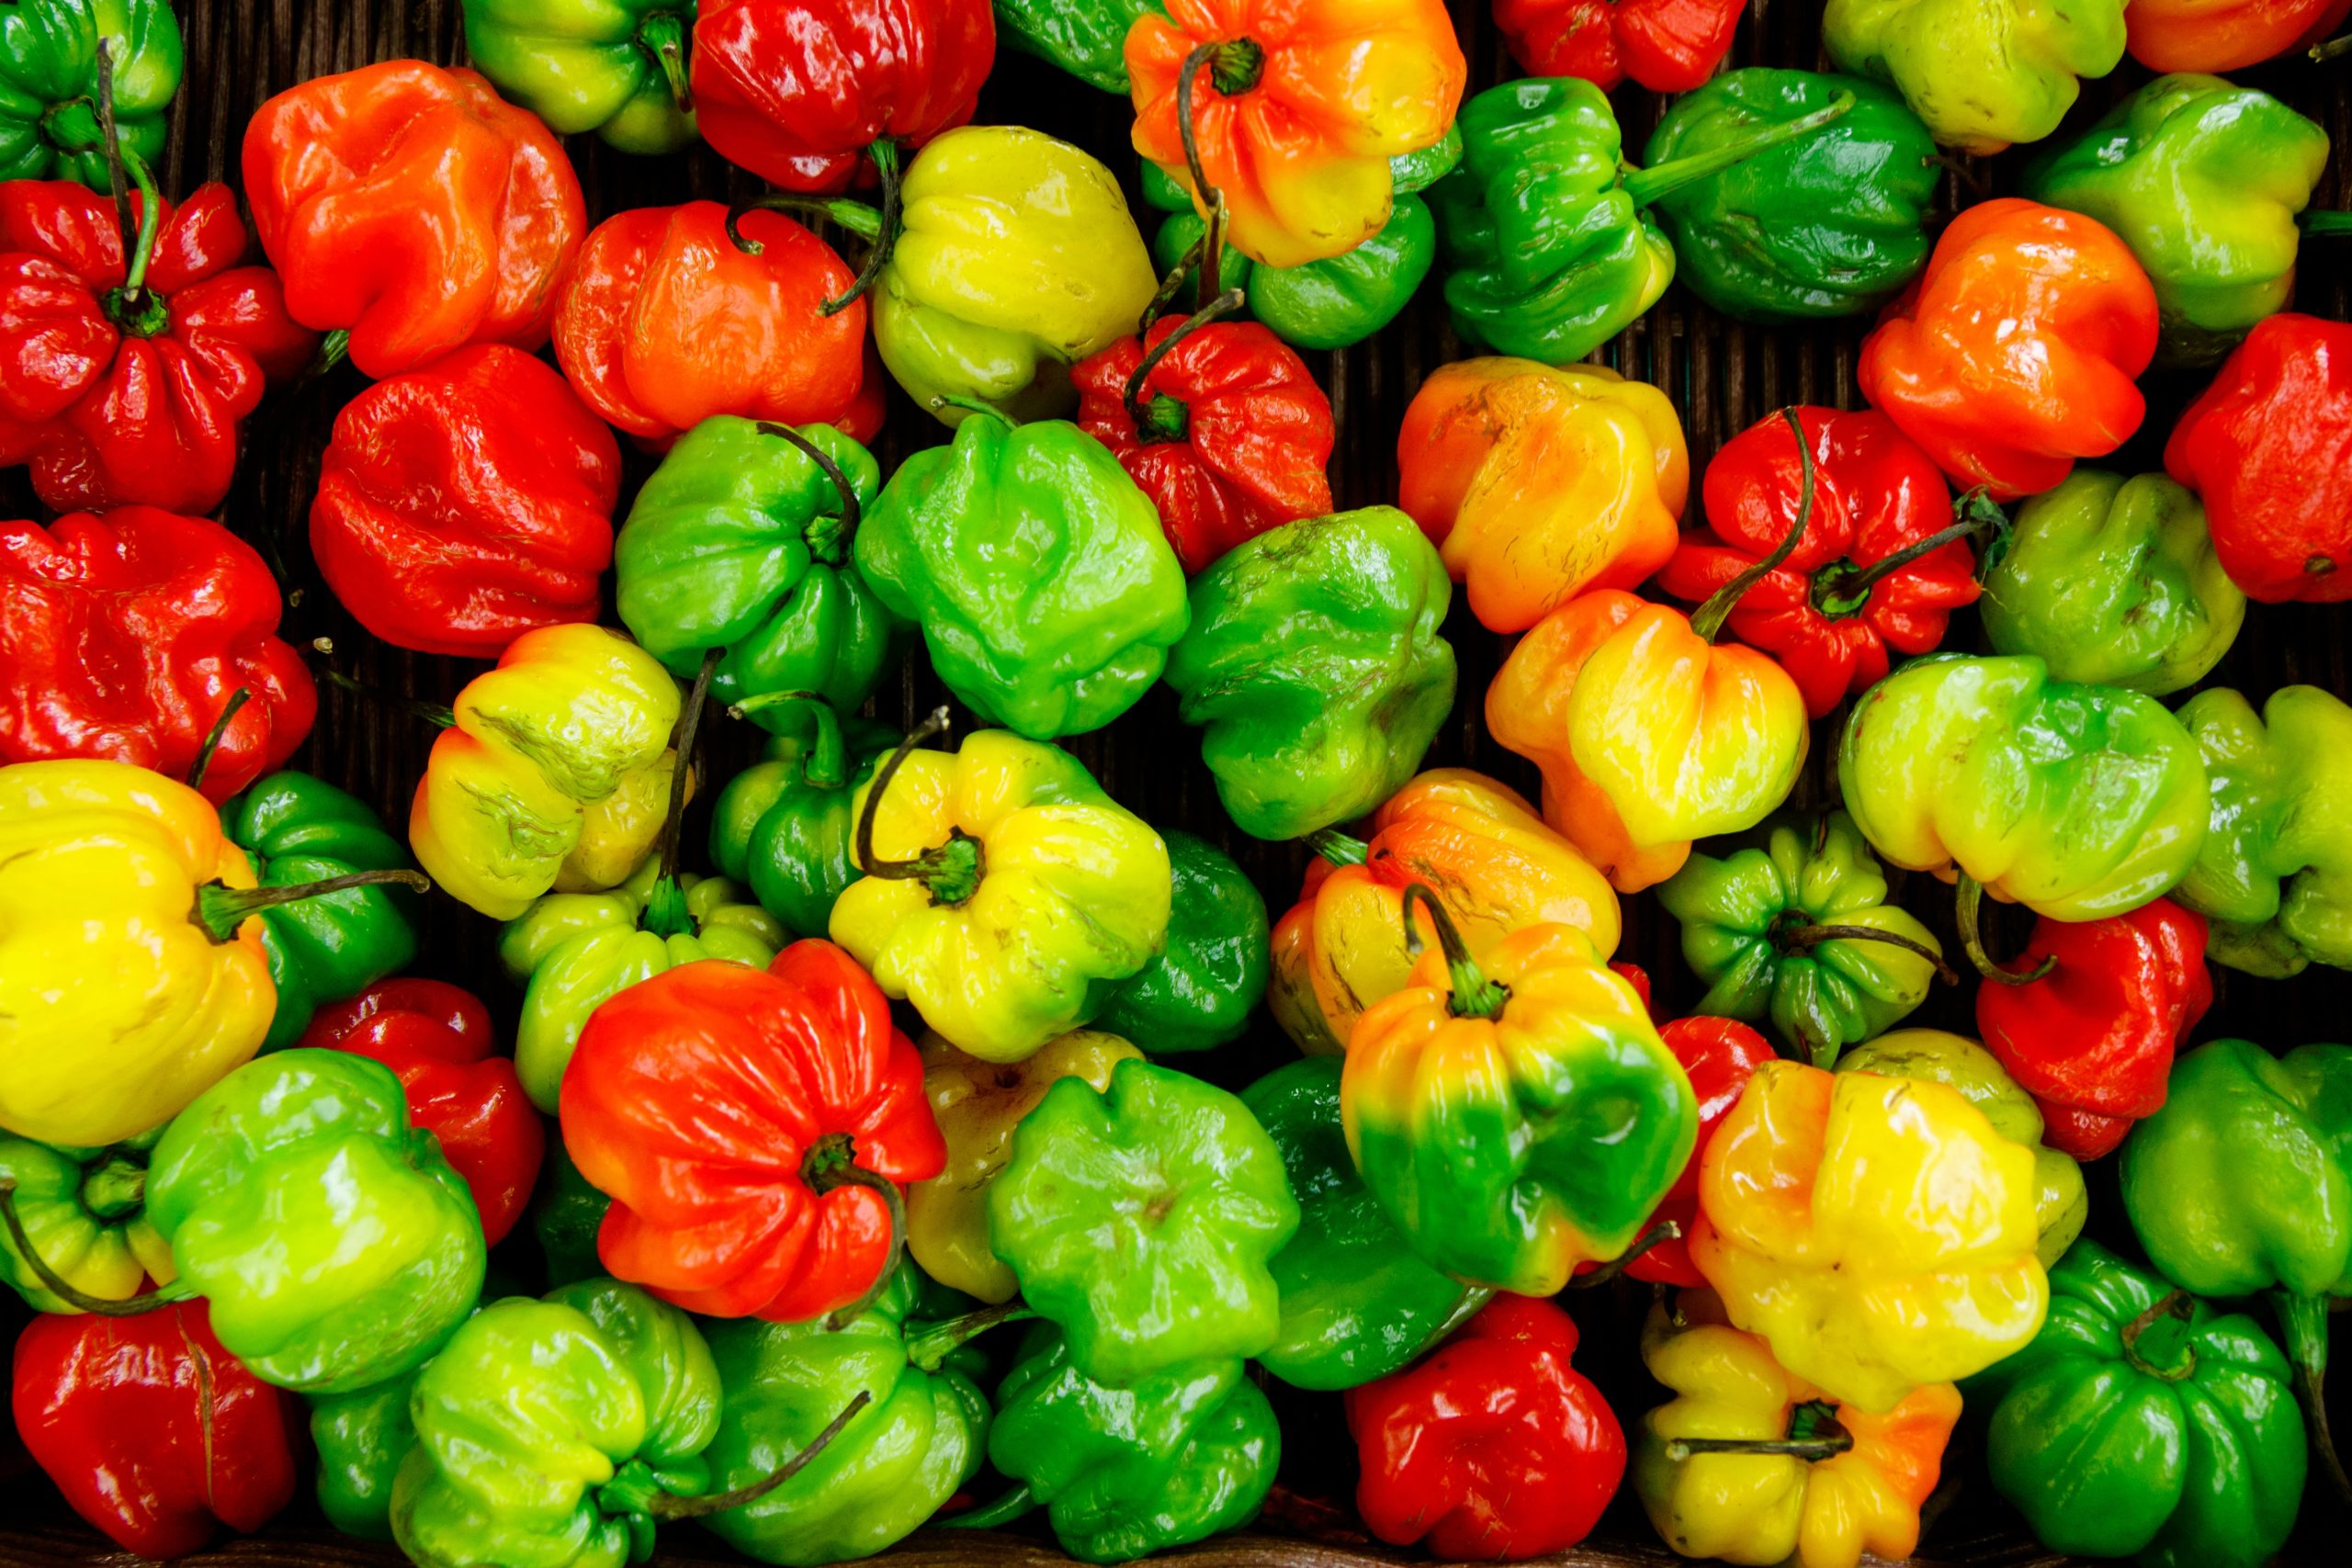 The Complete Guide to Growing Chocolate Habanero Peppers